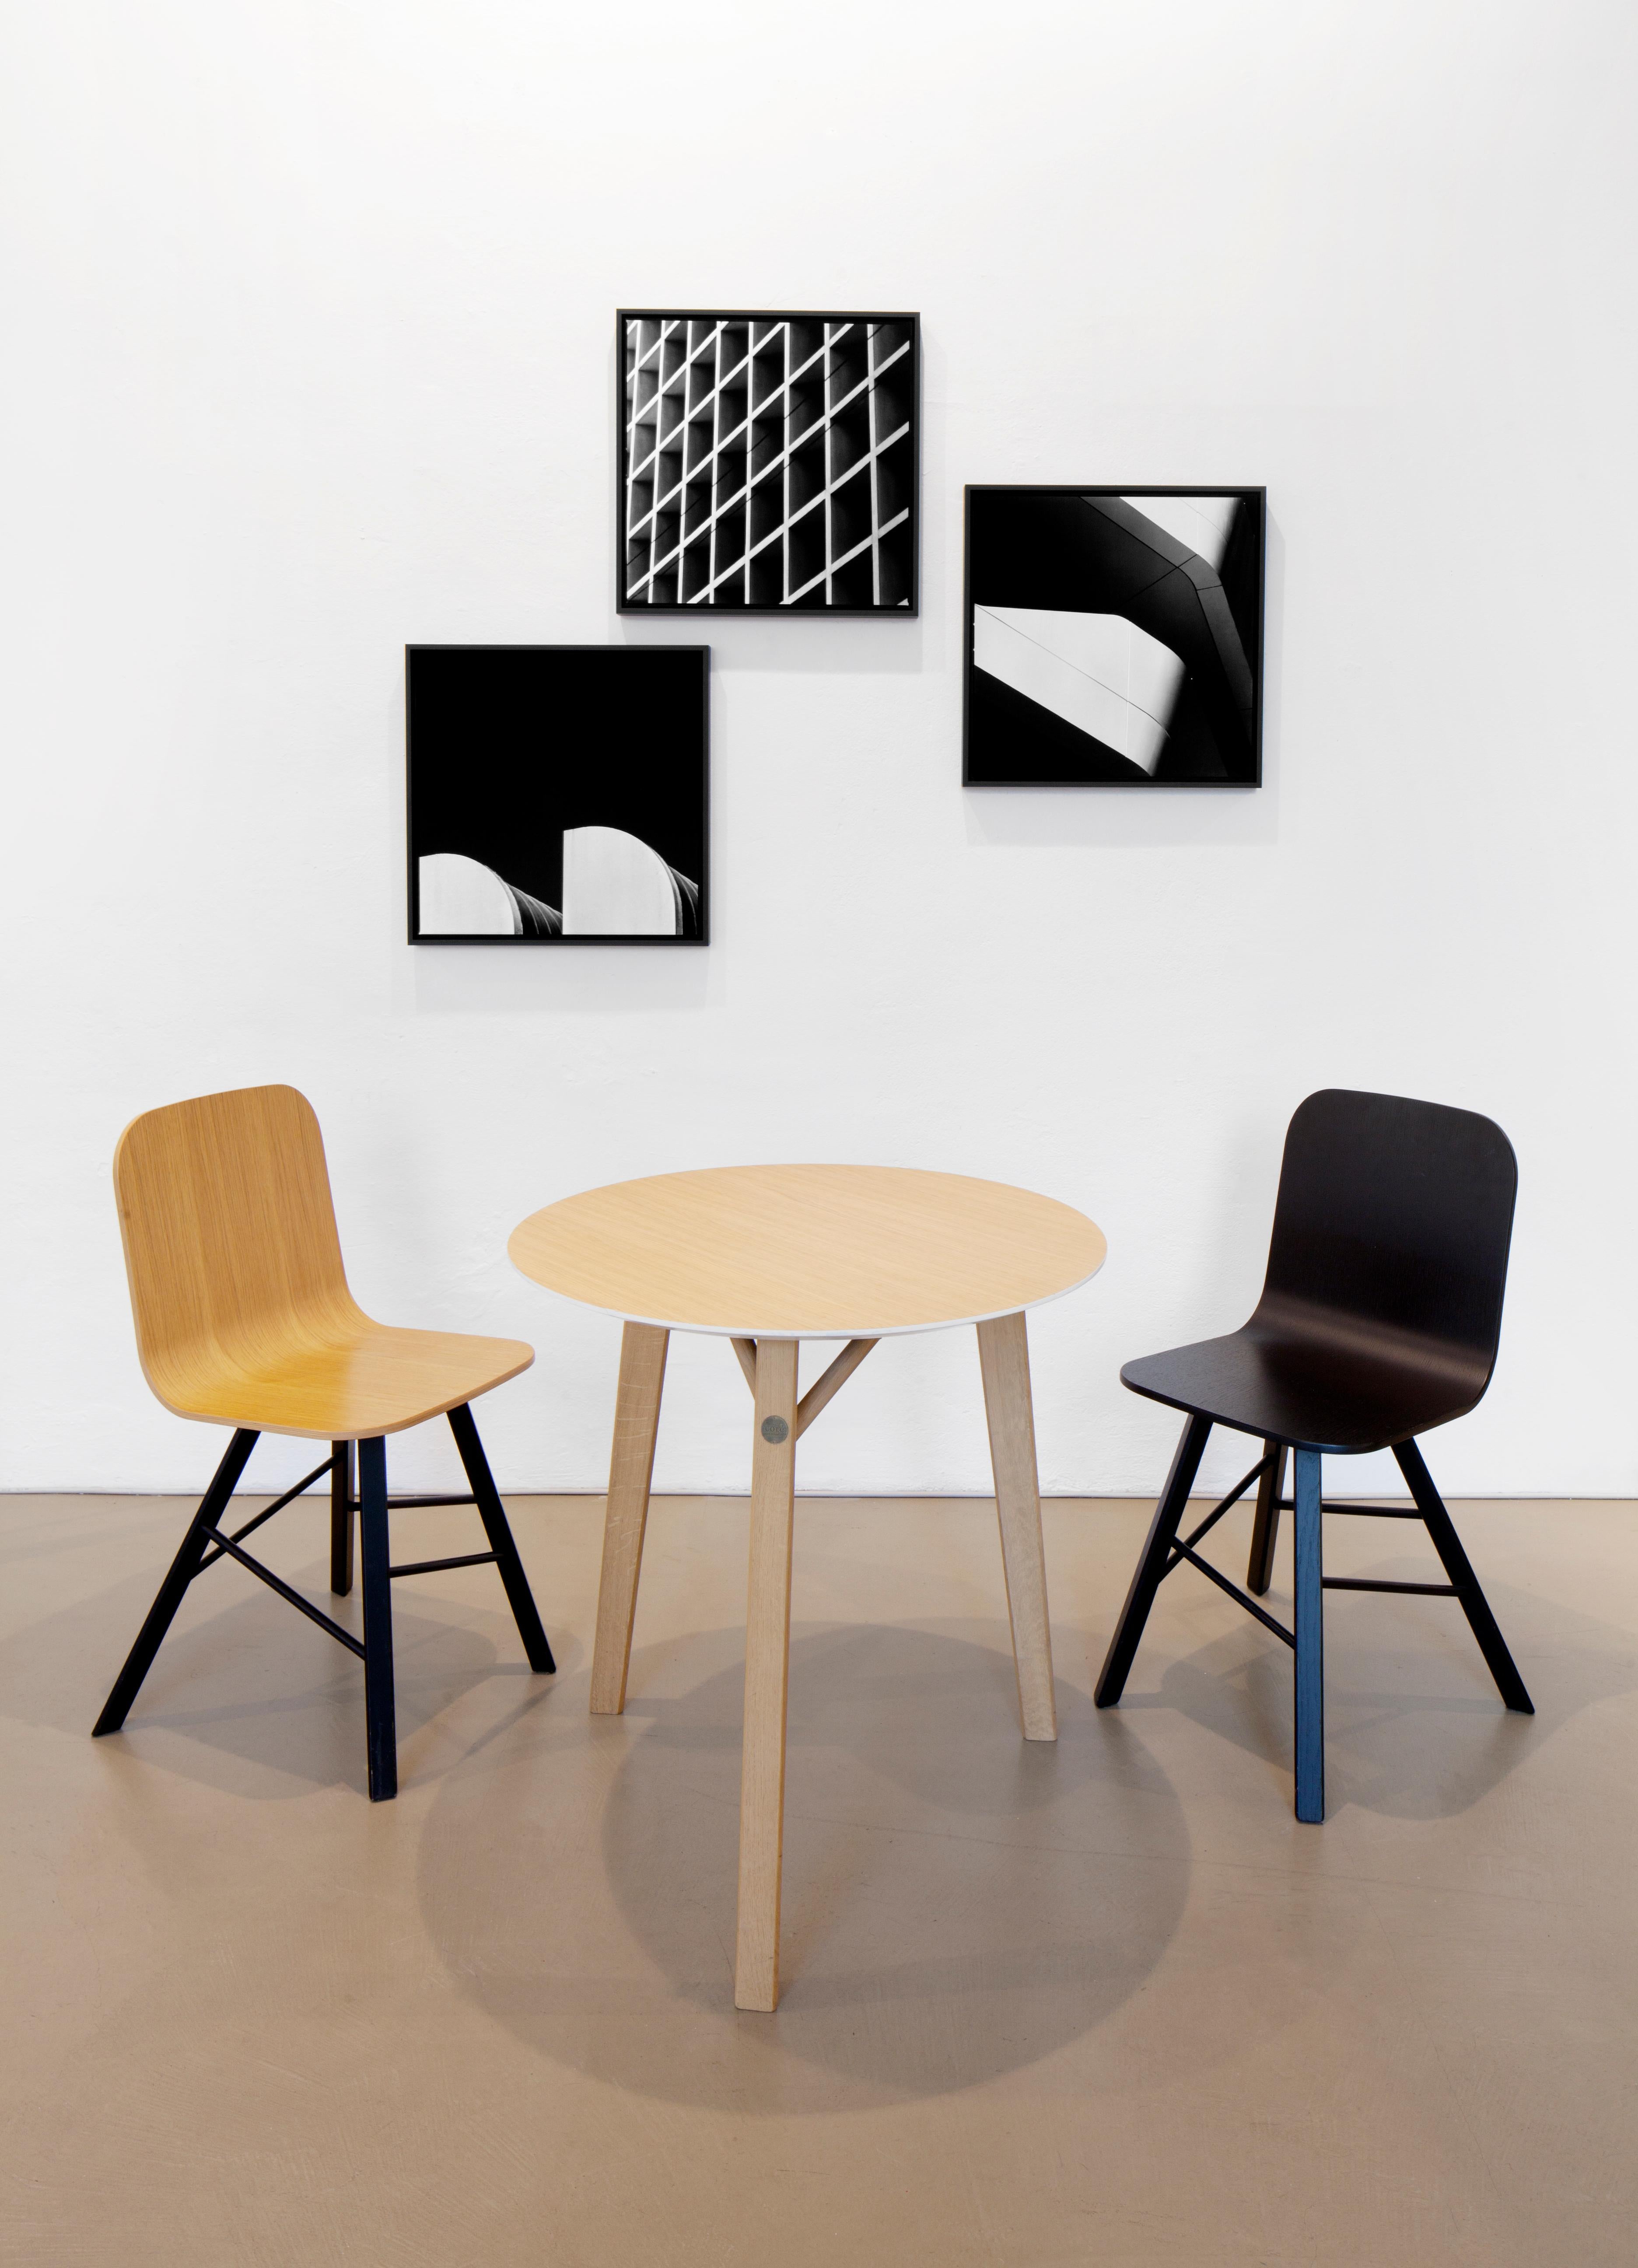 Paint Tria Tetra Square Table, Oak, Minimalist Design Icon Inspired to Graphic Art For Sale